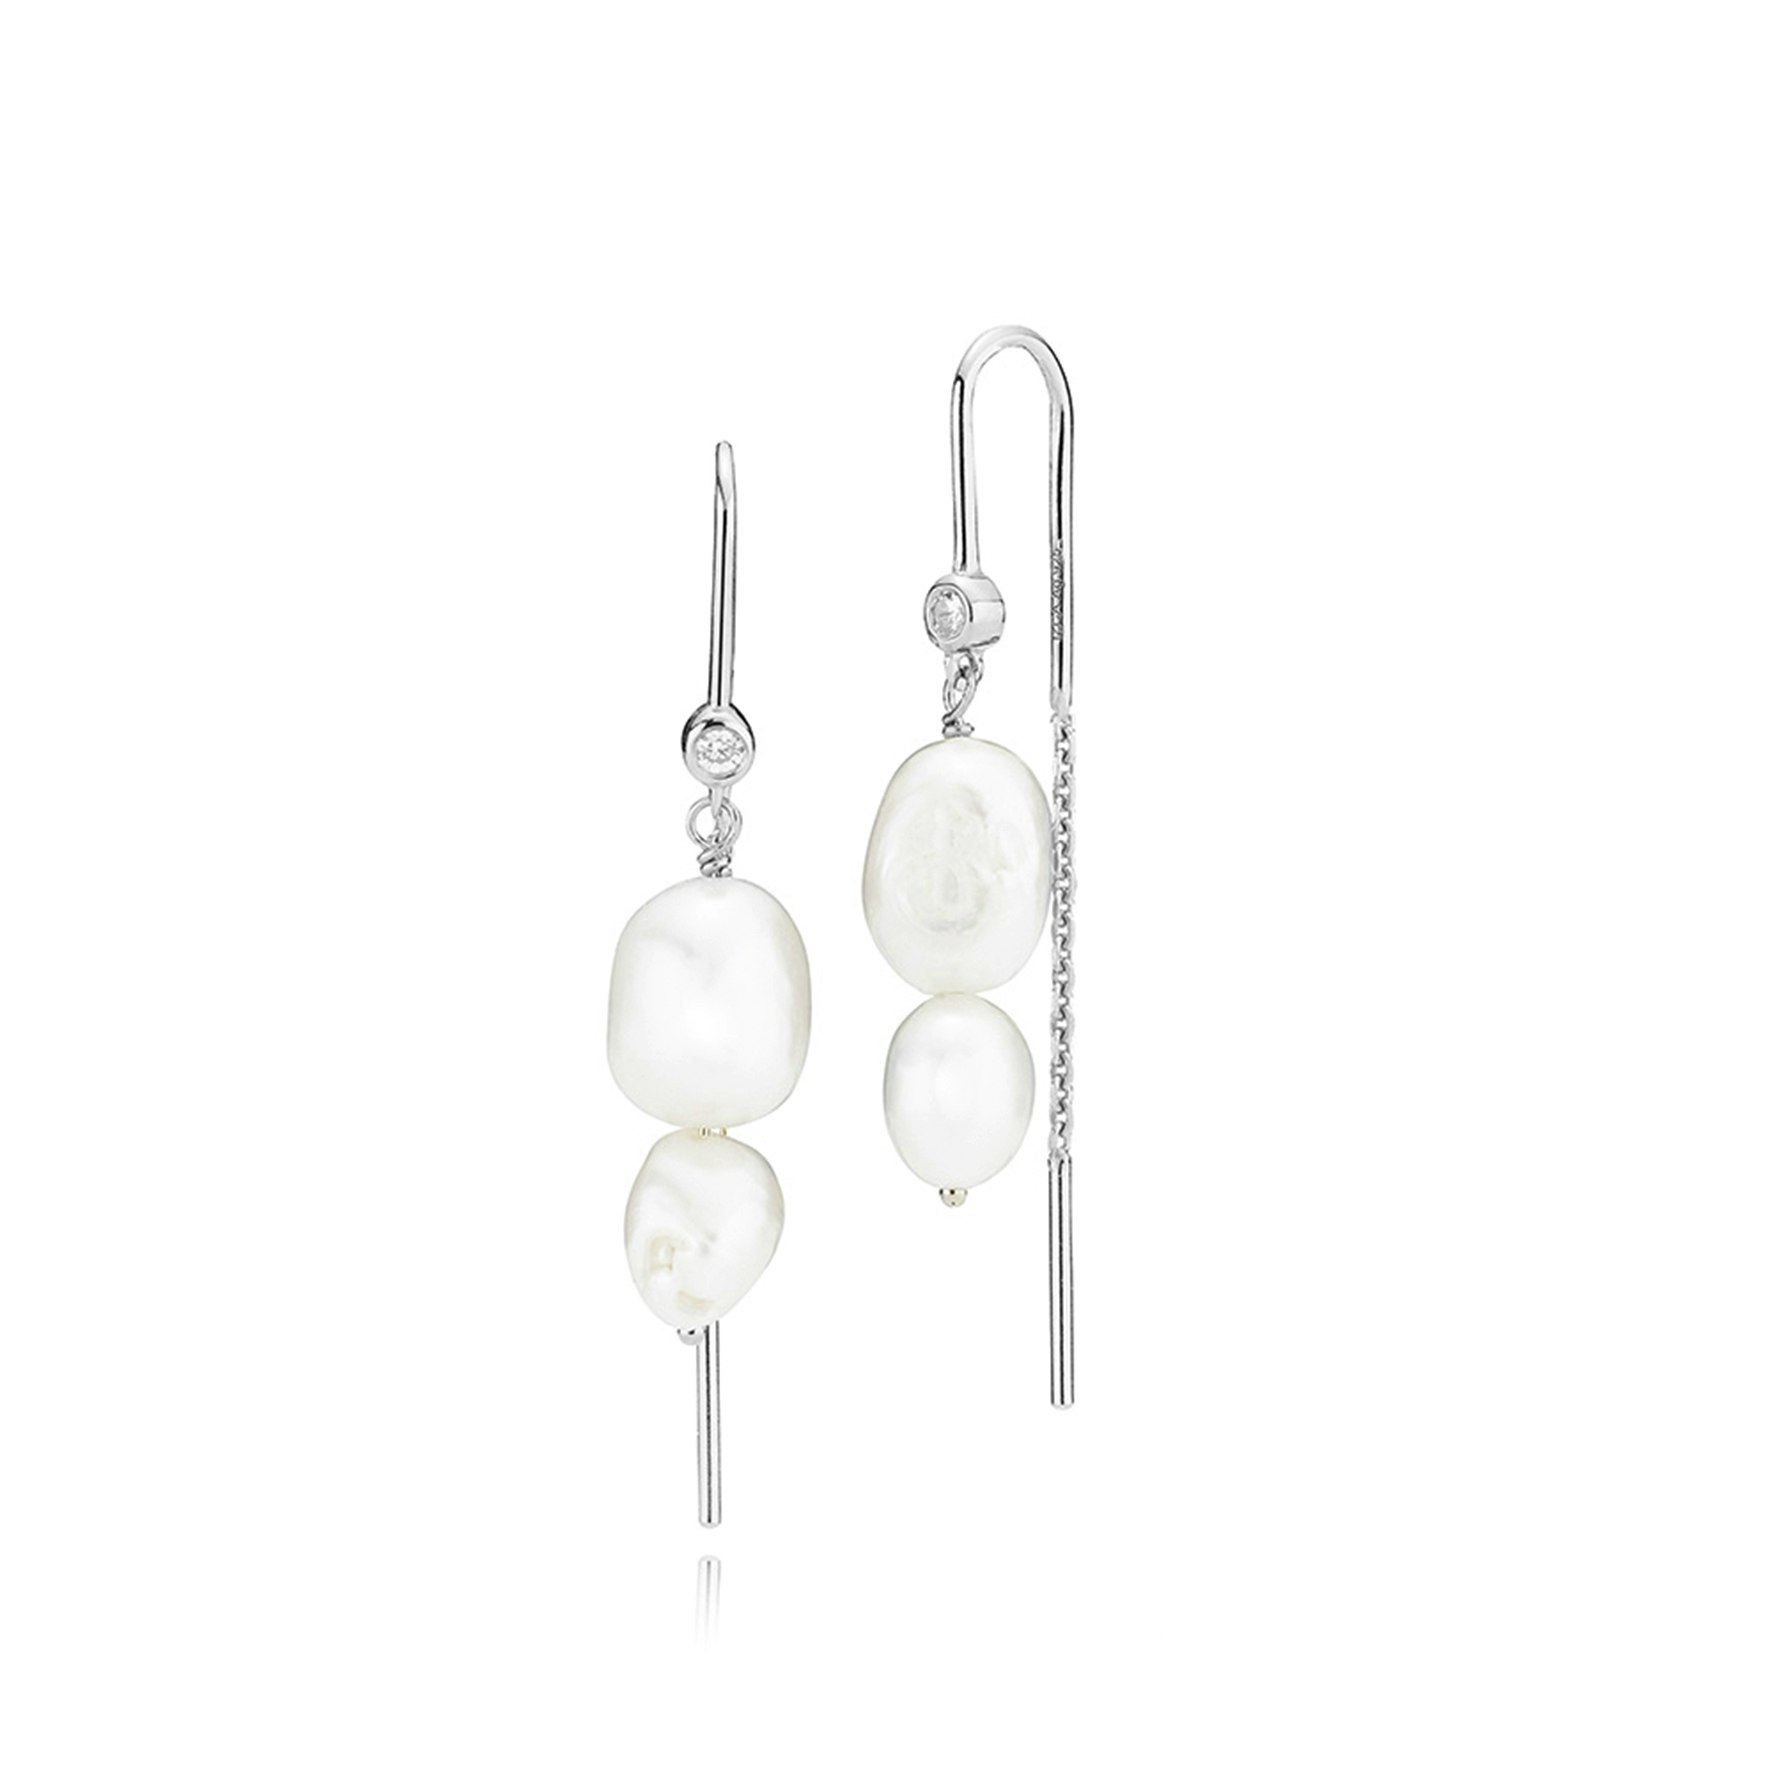 Leonora Earchains With Freshwater Pearls von Izabel Camille in Silber Sterling 925